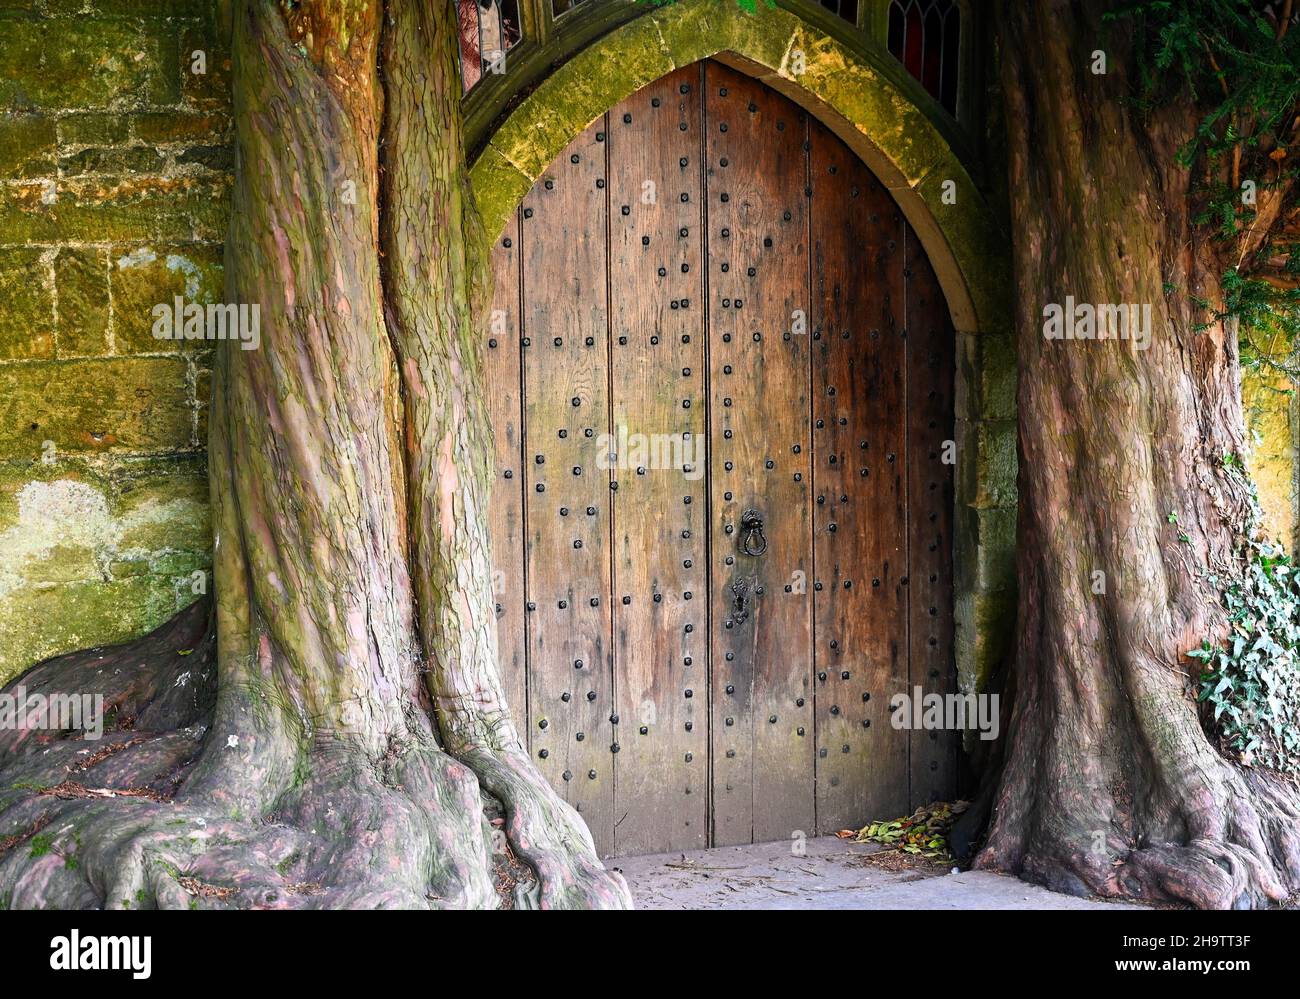 Mystical doorway in historic St Edward's Church in Stow-on-the-Wold. Wooden door looks like a portal. Stock Photo